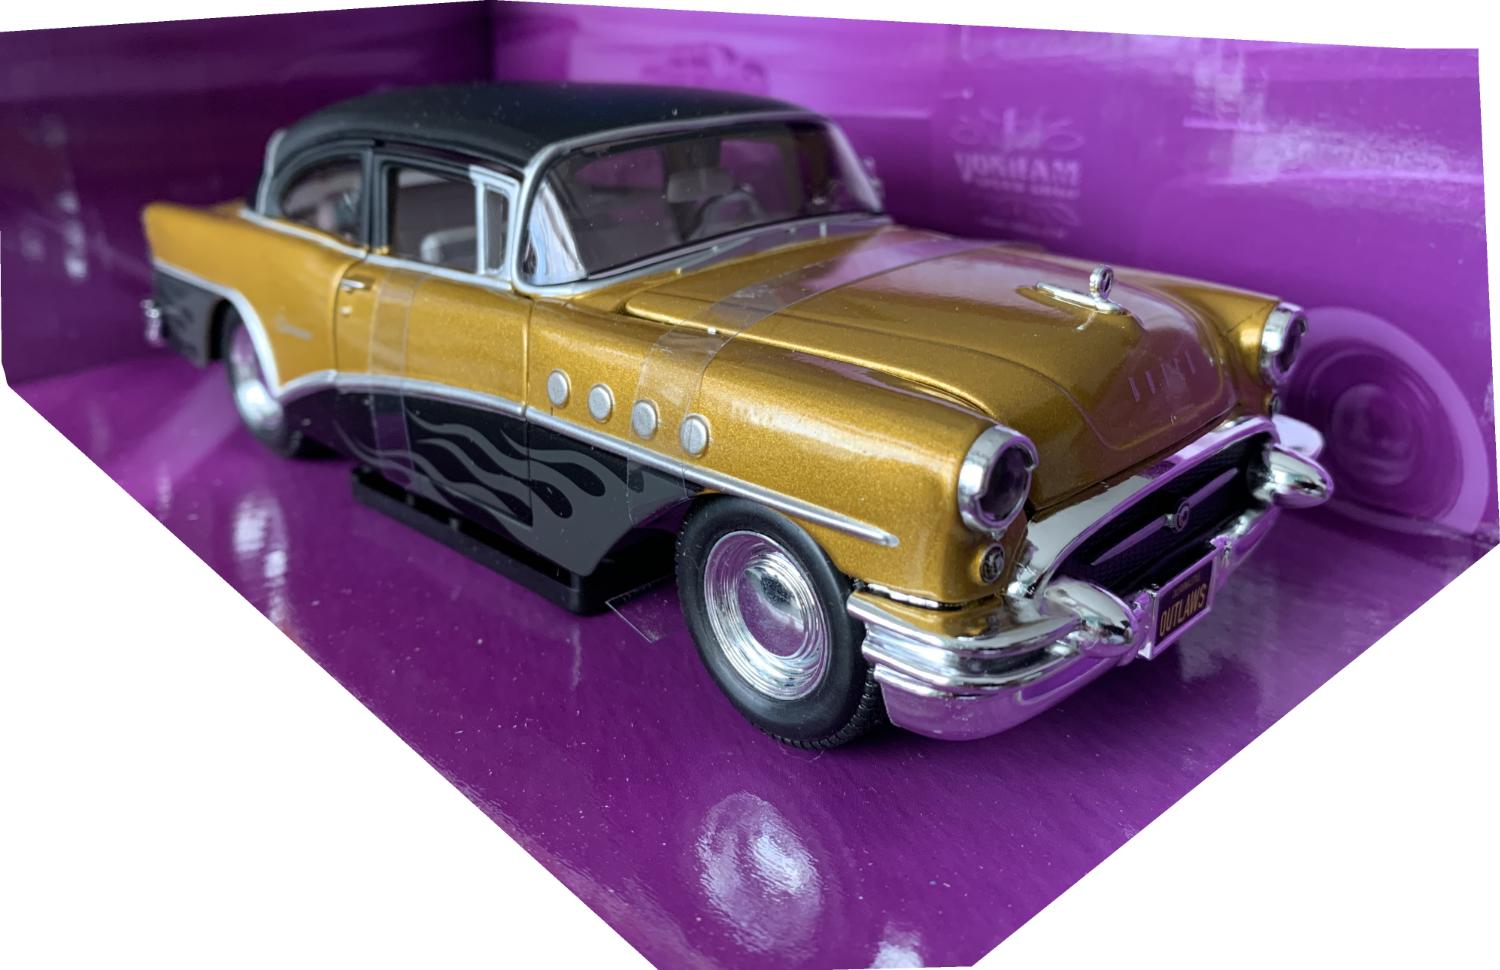 An excellent scale model of a Buick Century decorated in gold and black with opening driver and passenger doors, opening bonnet and working wheels.